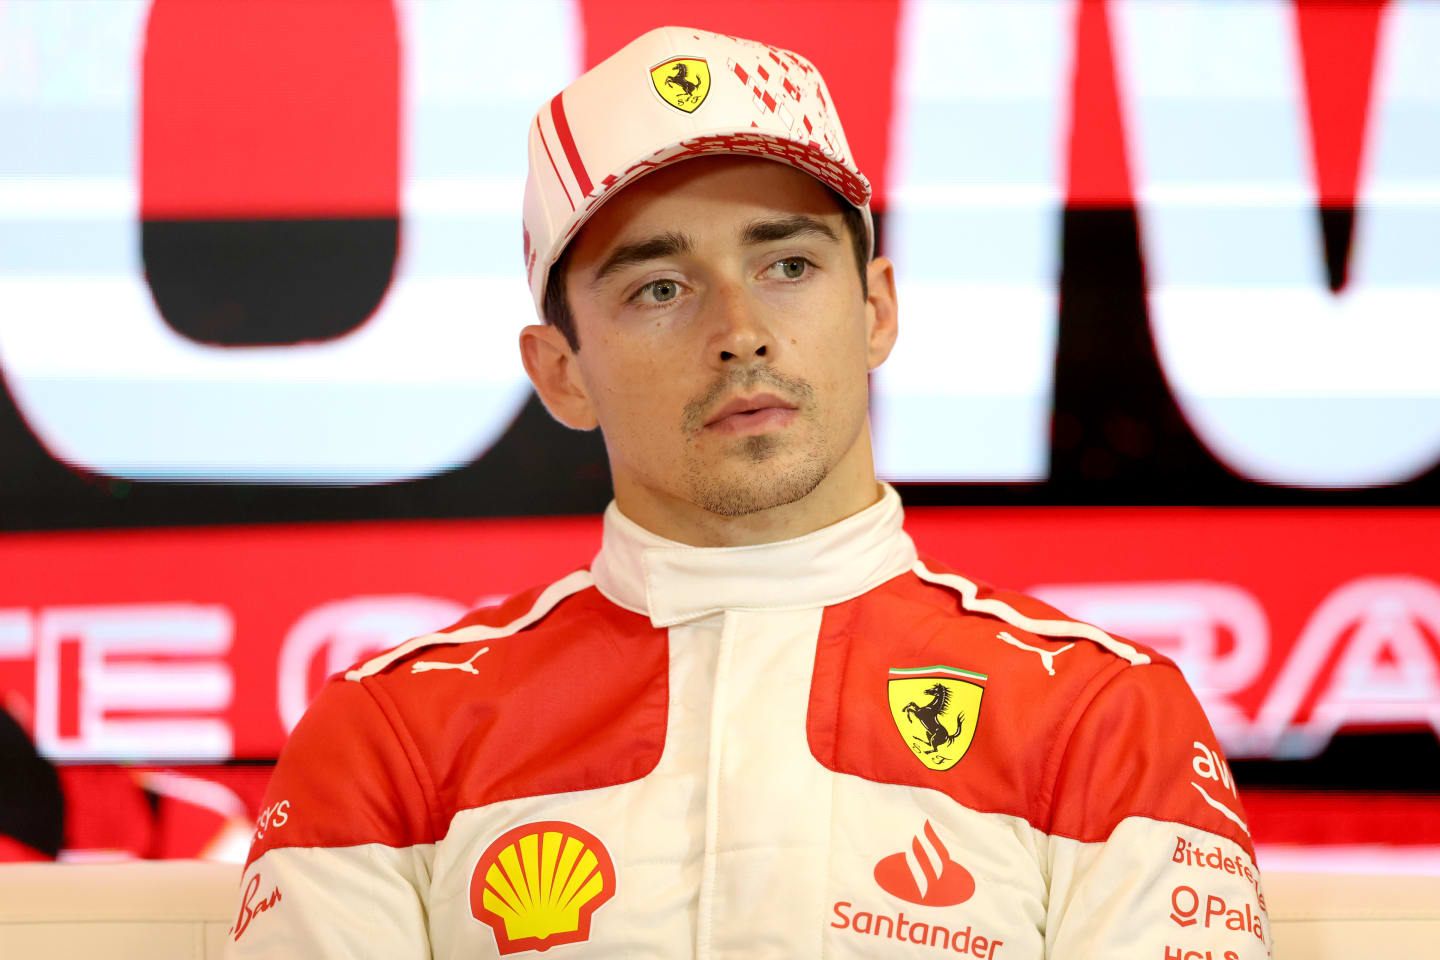 MONTE-CARLO, MONACO - MAY 27: Third placed qualifier Charles Leclerc of Monaco and Ferrari attends the press conference after qualifying ahead of the F1 Grand Prix of Monaco at Circuit de Monaco on May 27, 2023 in Monte-Carlo, Monaco. (Photo by Bryn Lennon/Getty Images)